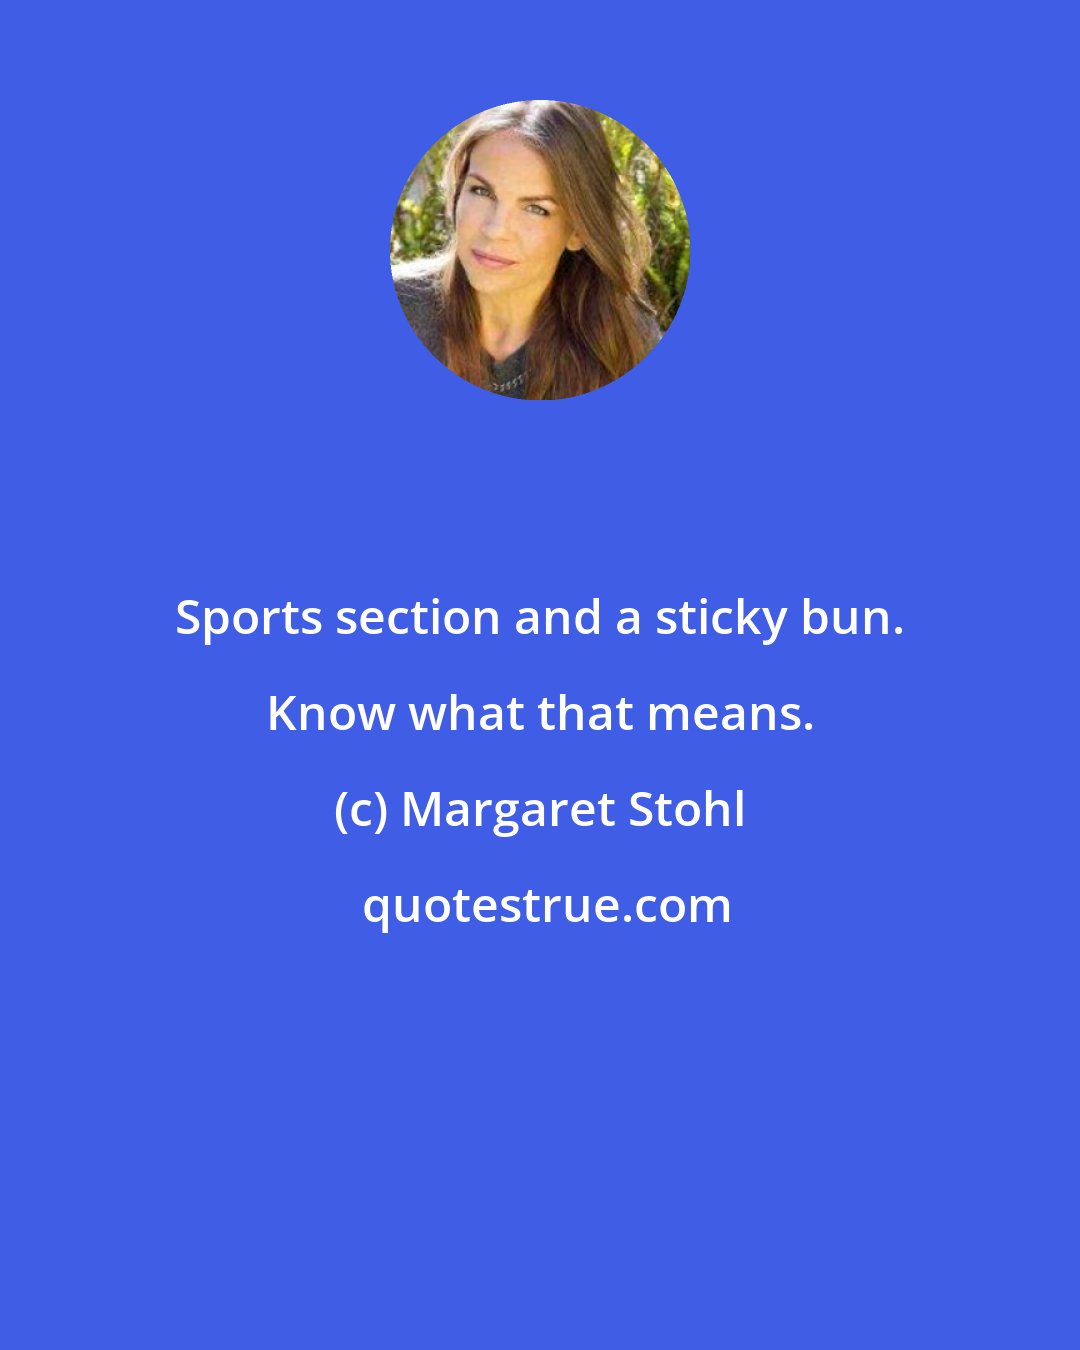 Margaret Stohl: Sports section and a sticky bun. Know what that means.